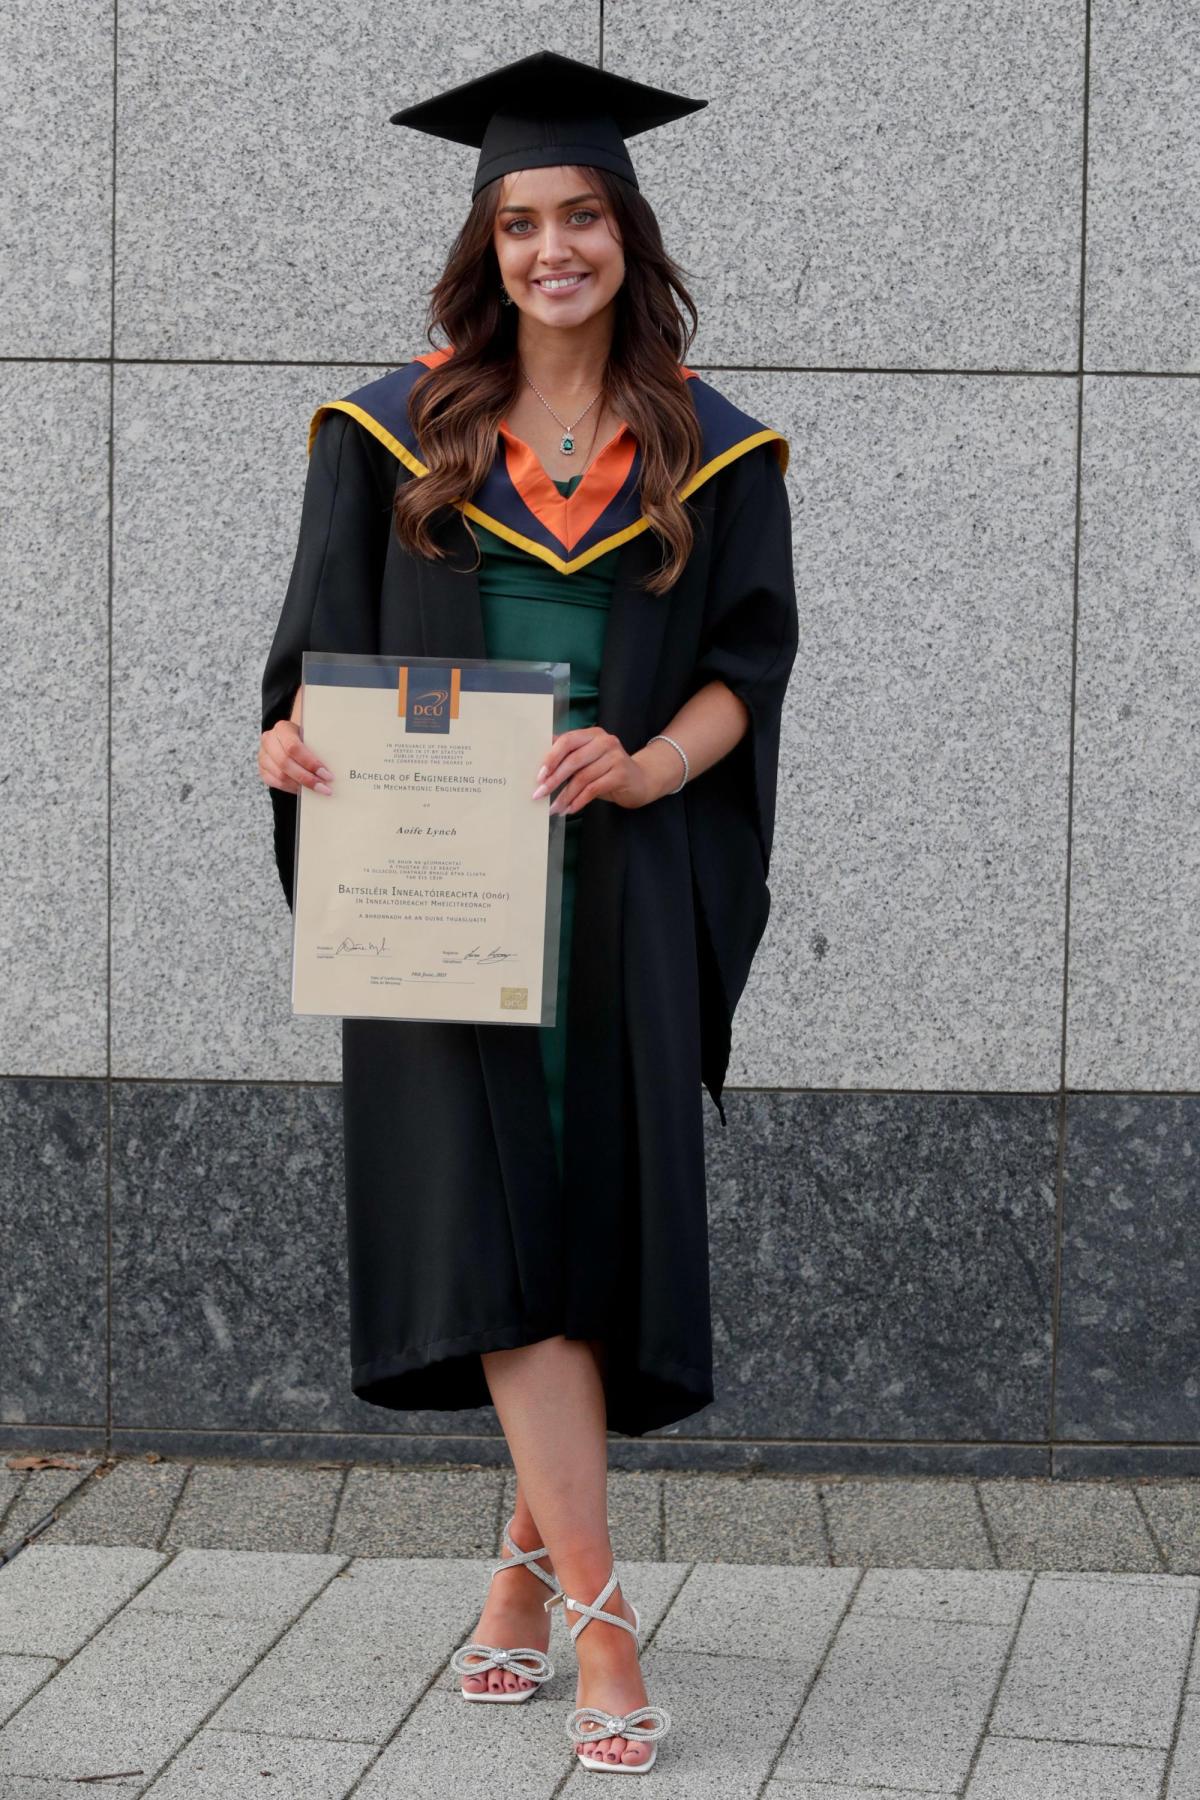 Aoife Lynch MEng in Mechatronic Engineering